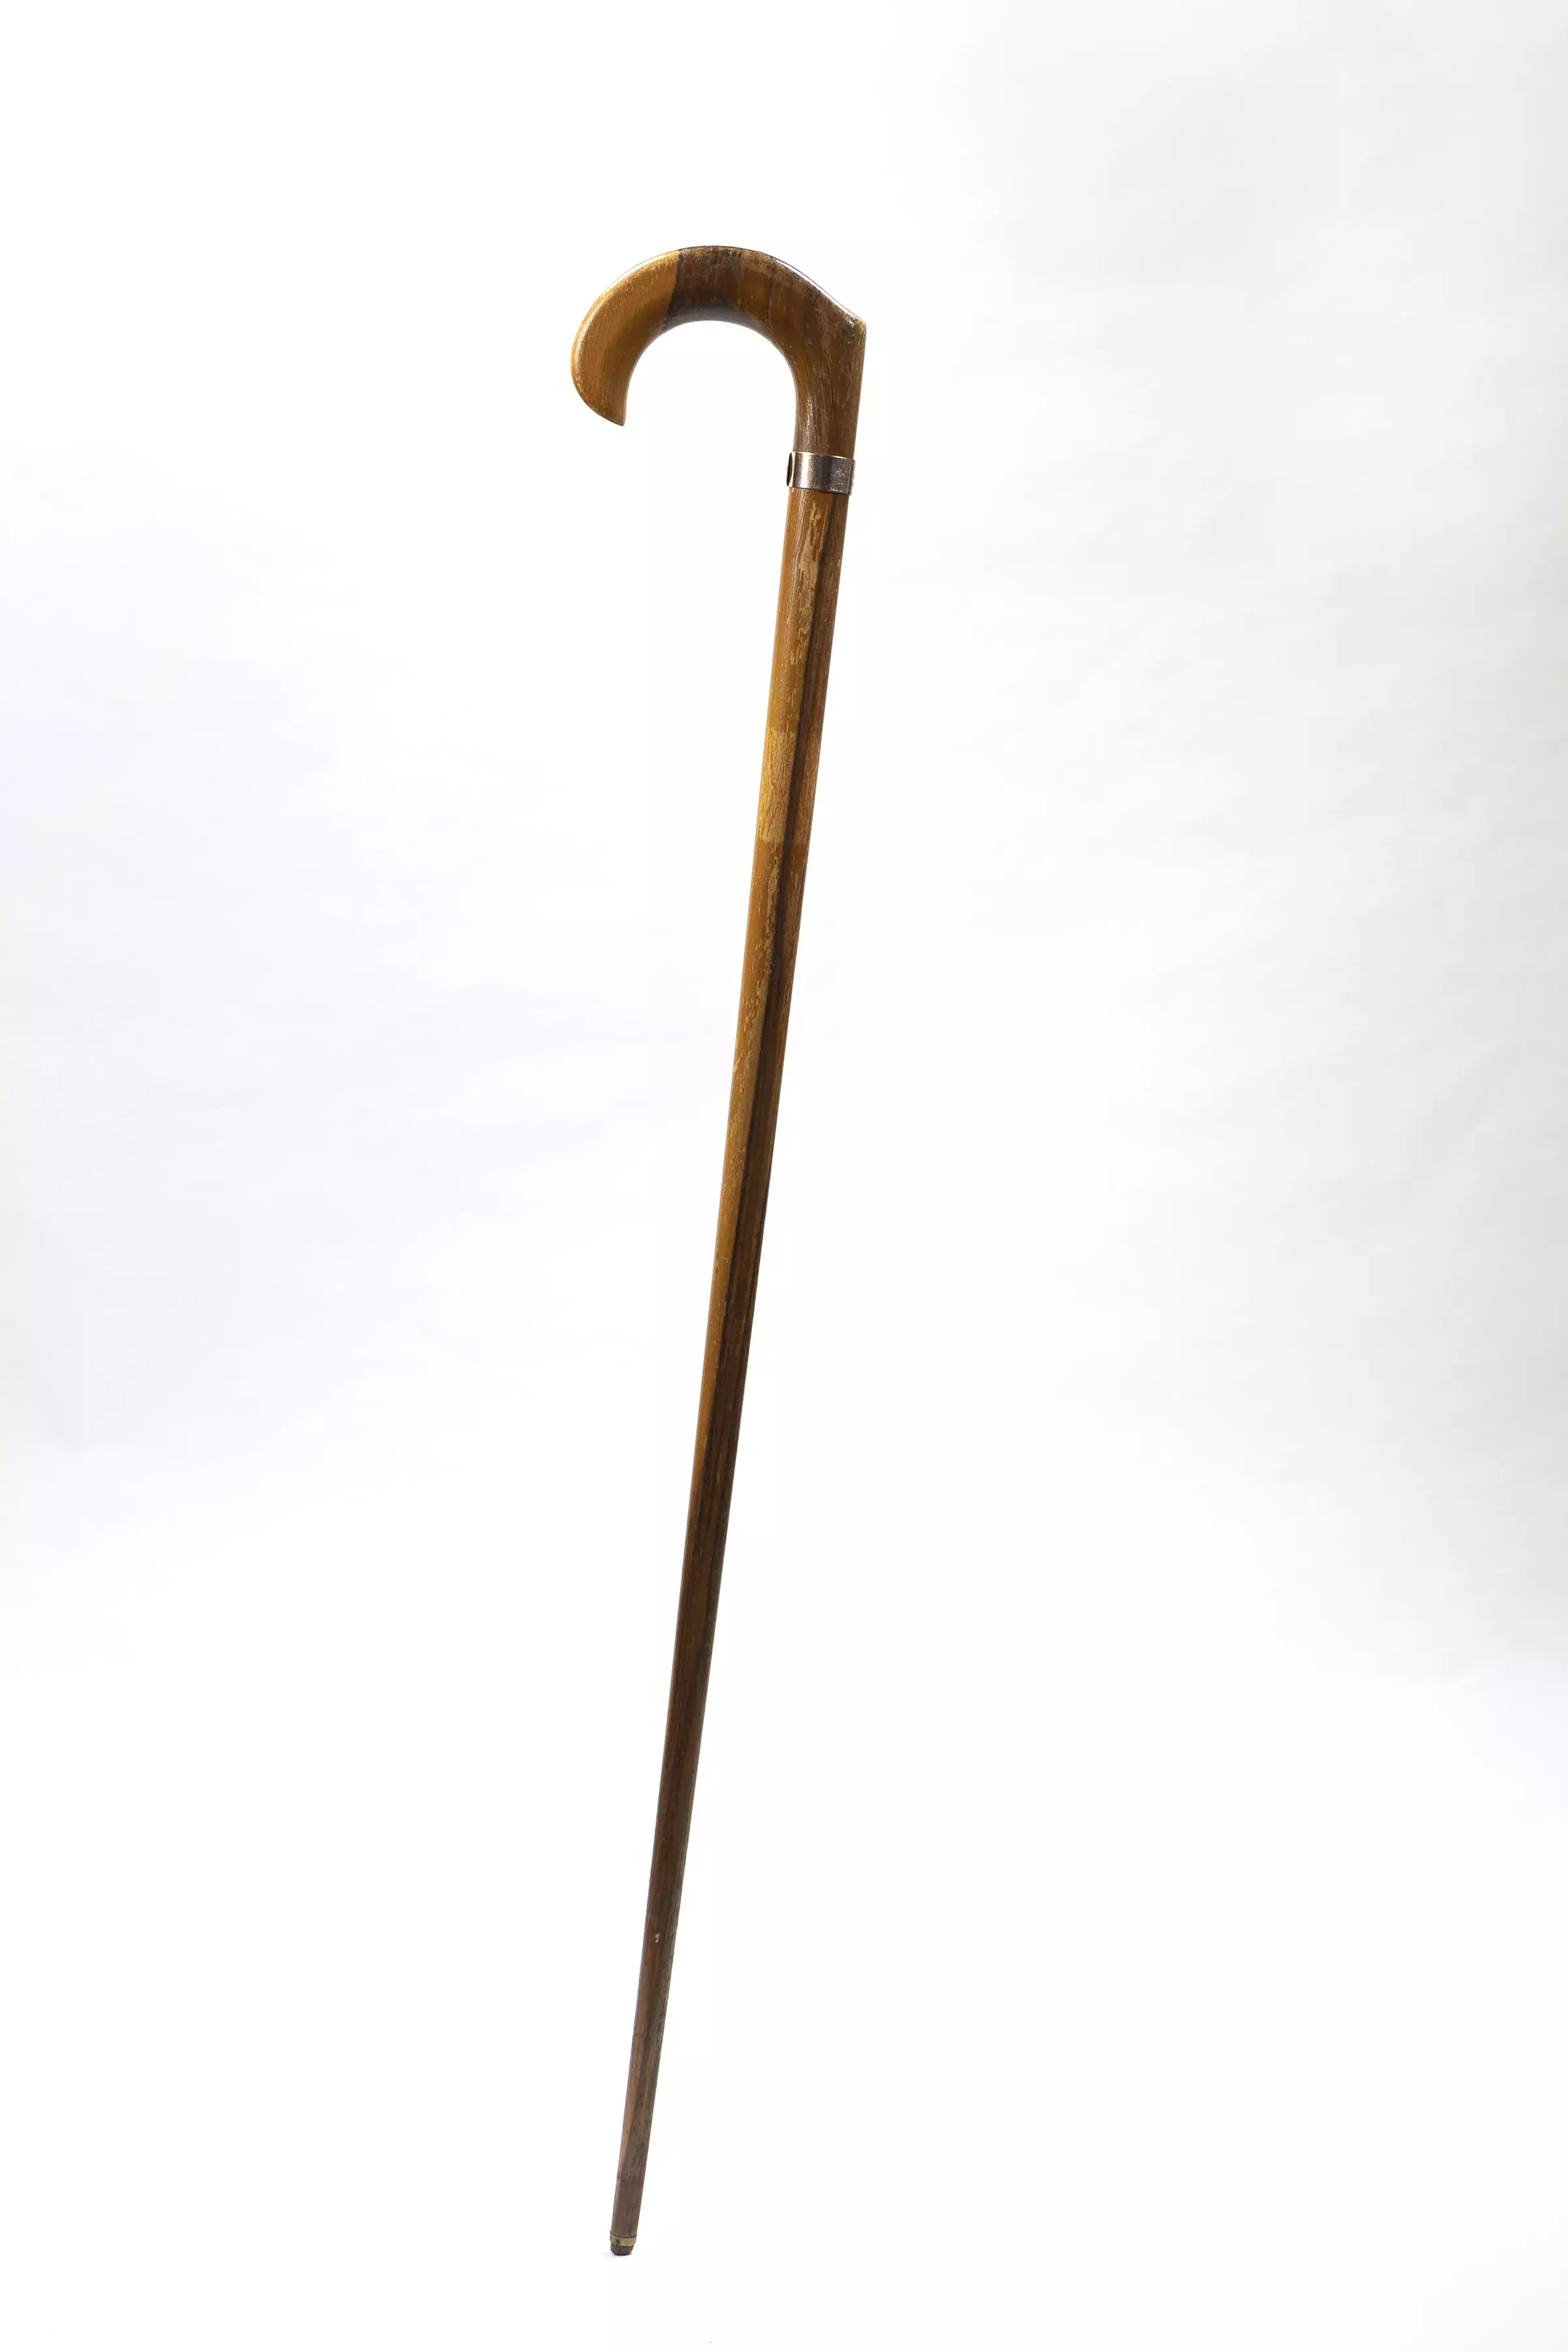 A timber walking stick with a curved handle with a metal inscribed label.  